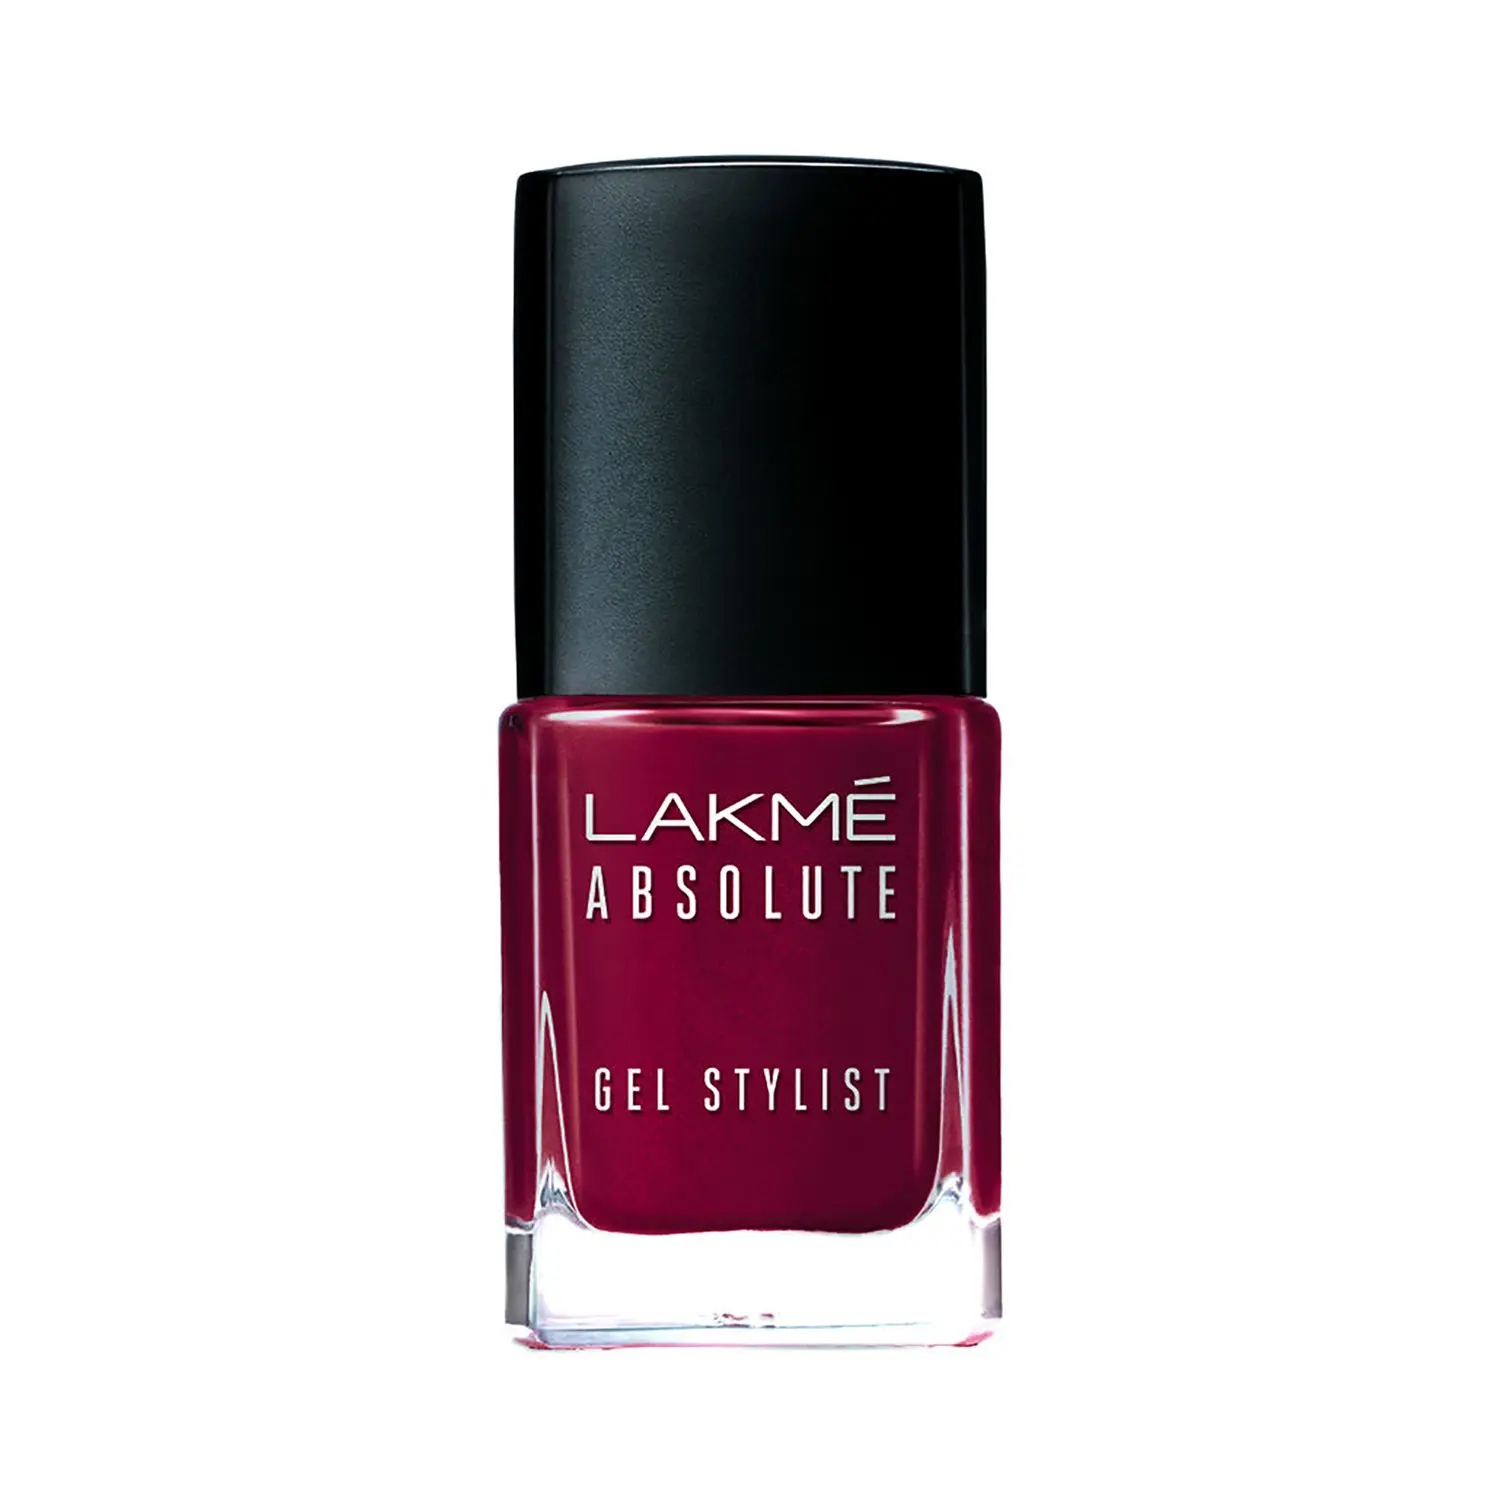 Lakme | Lakme Absolute Gel Stylist Nail Color - Fearless (12ml)